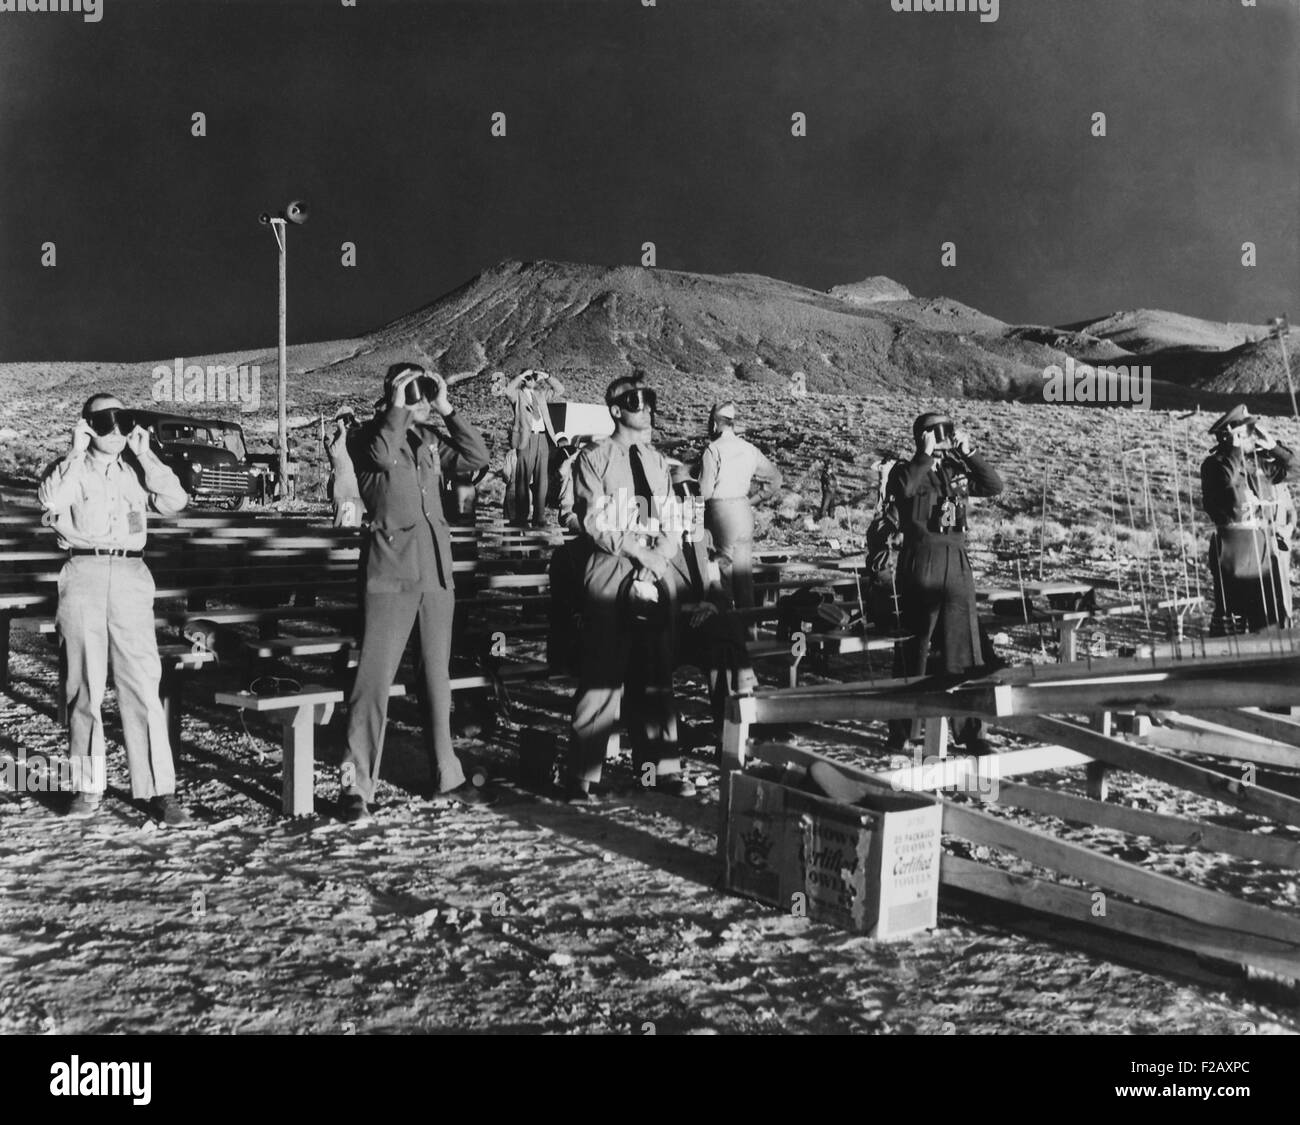 Canadian and British observers illumined by both the sun and an atomic blast of ABLE, a 1-kiloton atomic bomb. January 27, 1951. B-50 Superfortress dropped the first A-bomb of the Operation Ranger series, at the Nevada Proving Ground, in an unpopulated desert 65 miles northwest of Las Vegas. Most observers have goggles, but others without eye protection, stand with their backs to the blast. (BSLOC 2015 2 12) Stock Photo